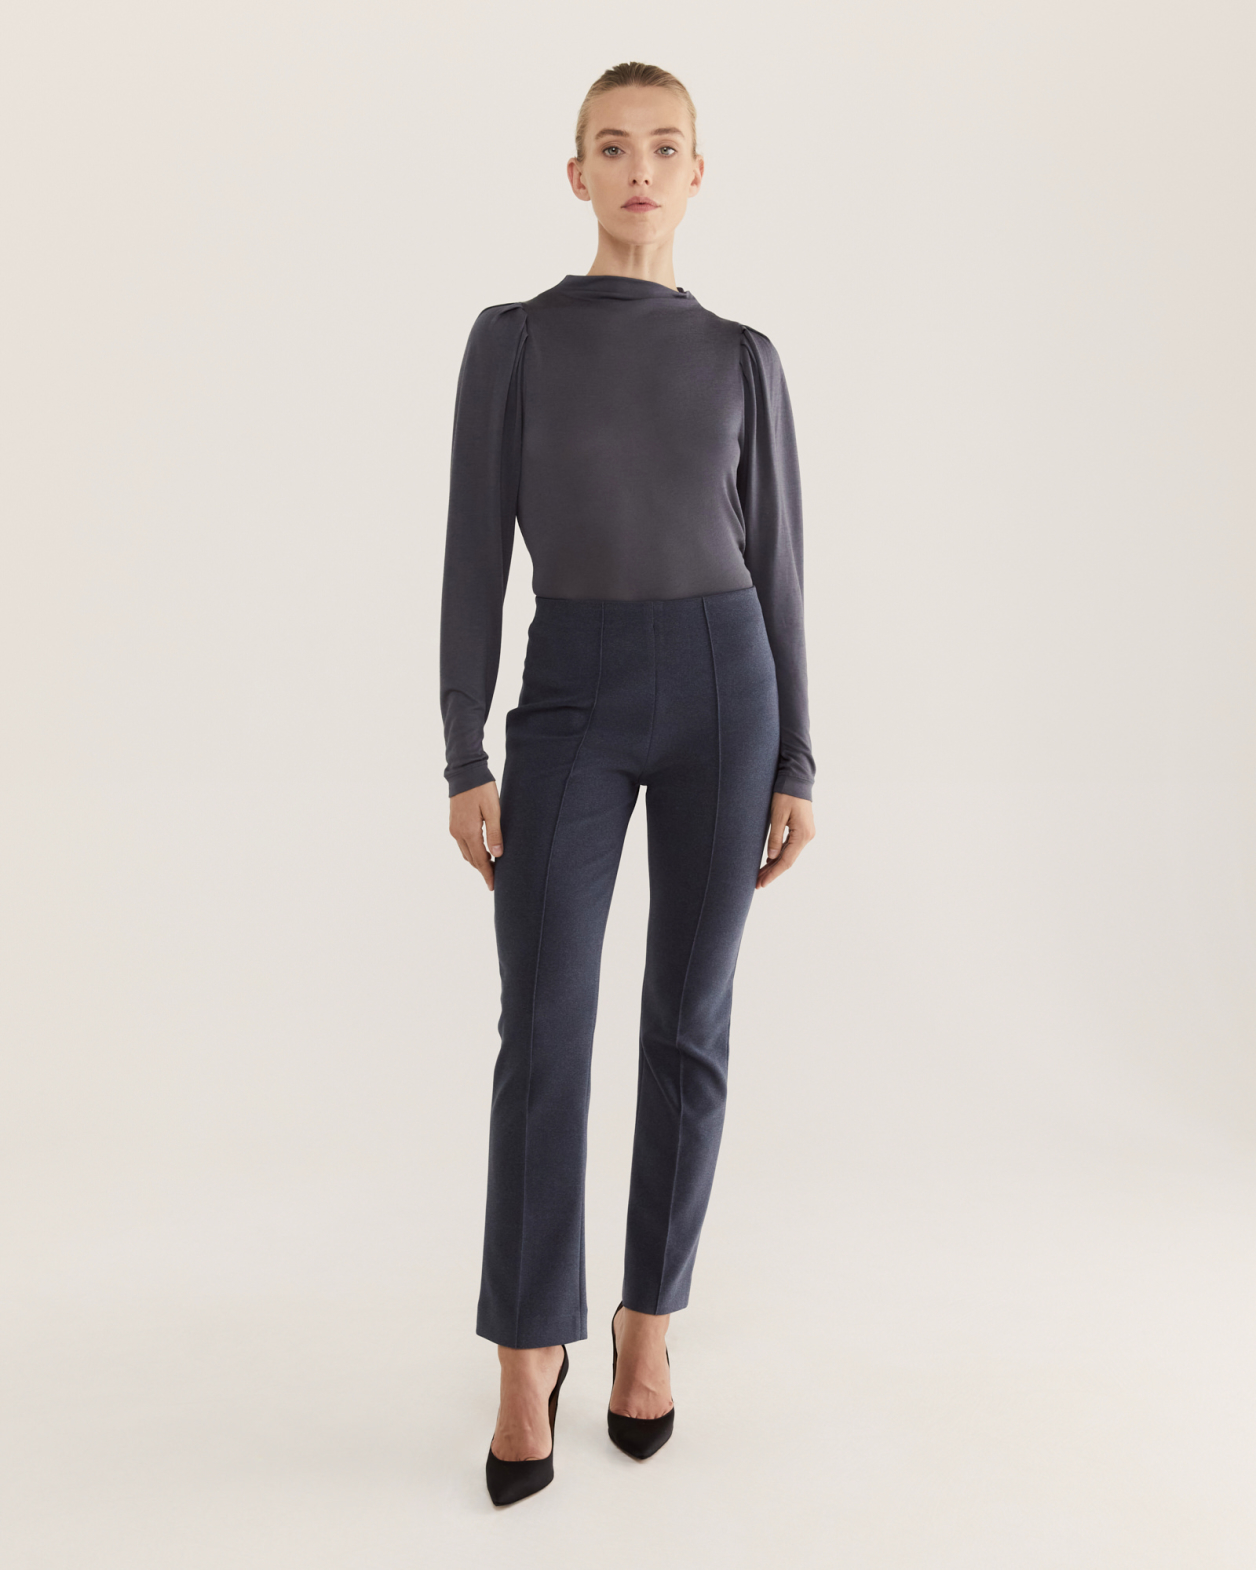 Milla Pull On Pant in CHARCOAL MELANGE